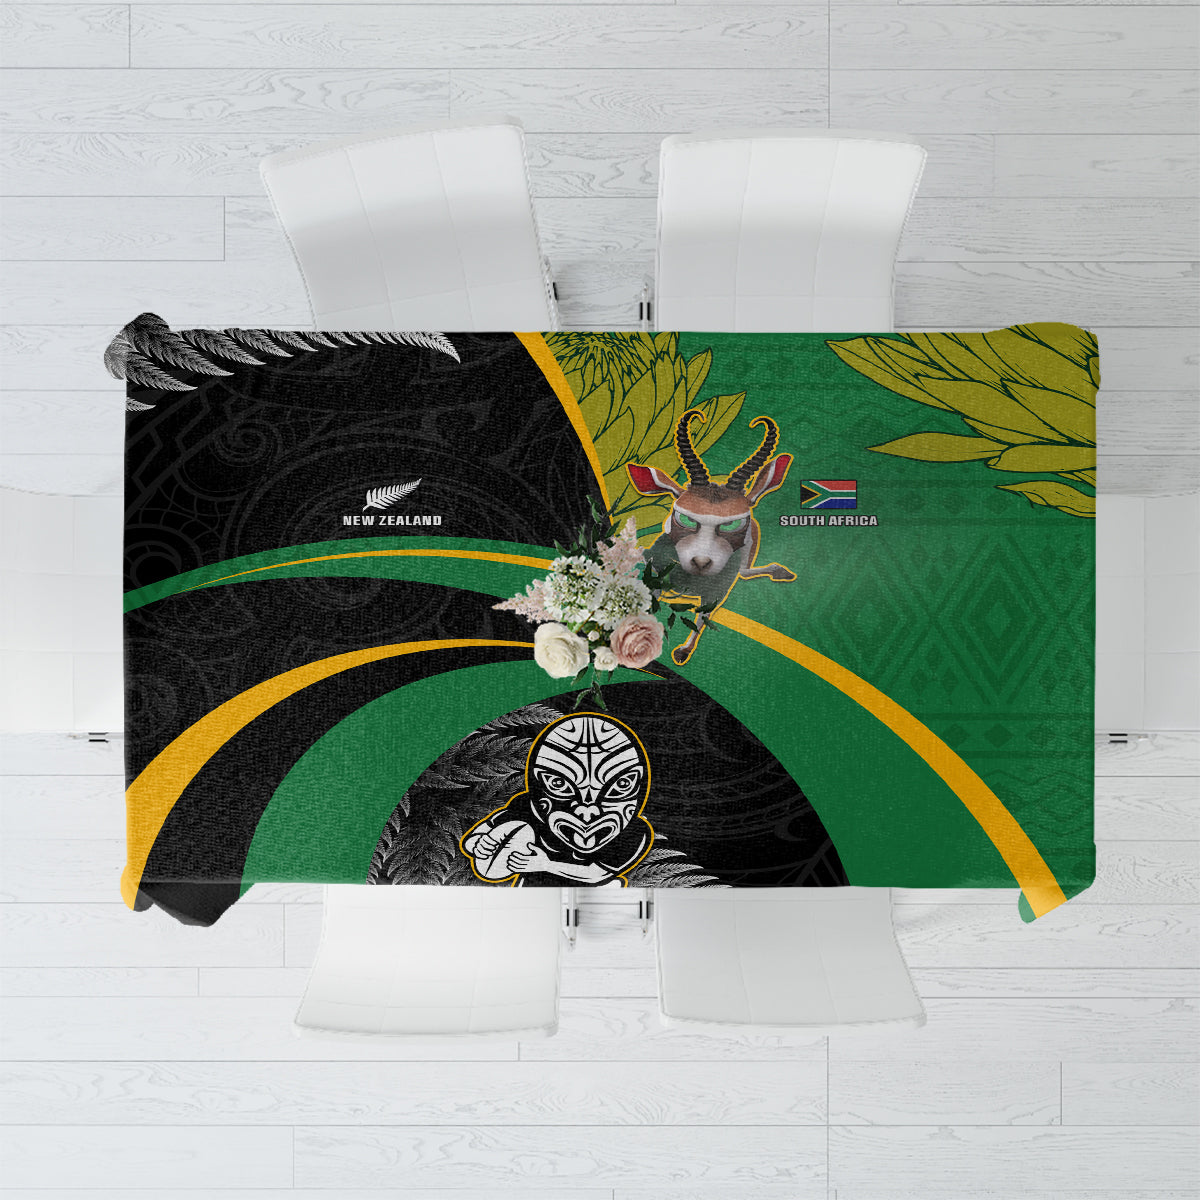 New Zealand And South Africa Rugby Tablecloth 2023 Springboks Combine All Black Silver Fern LT05 Green - Polynesian Pride